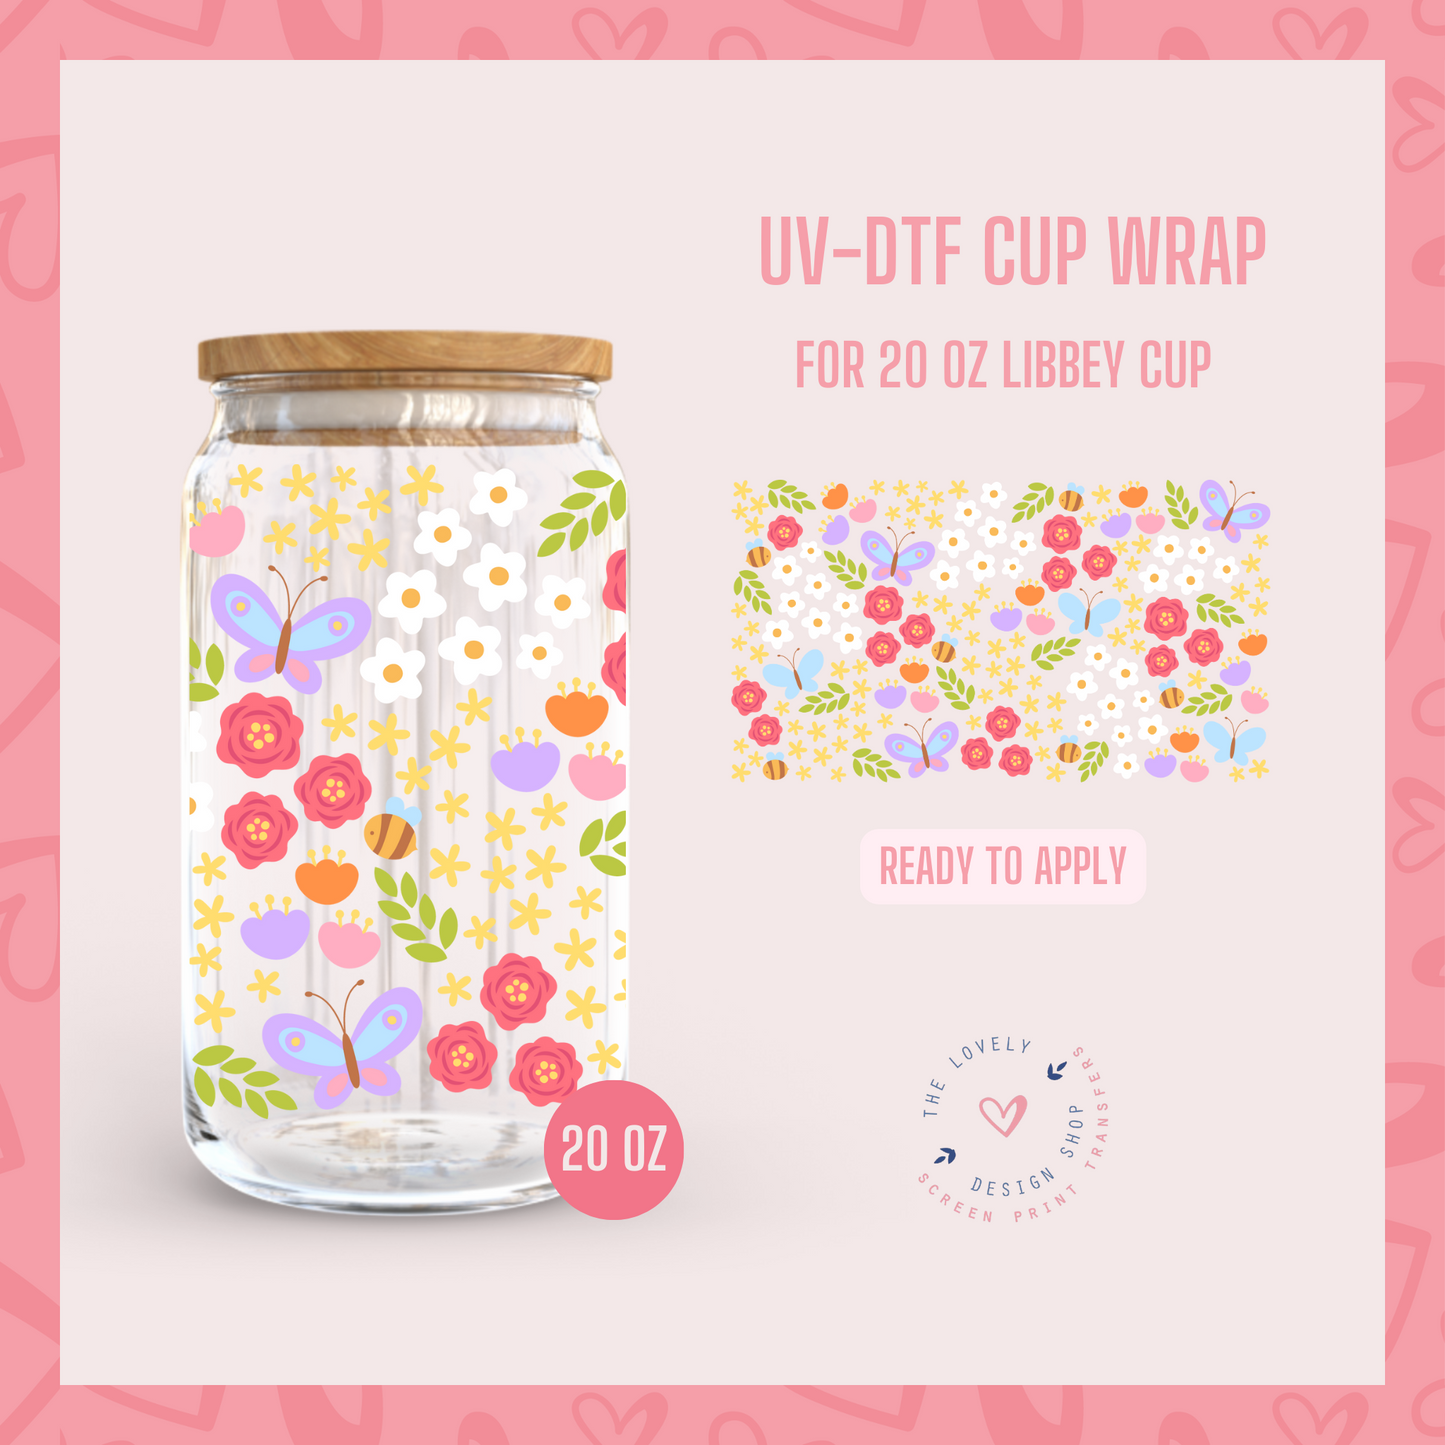 Floral Spring - UV DTF 20 oz Libbey Cup Wrap (Ready to Ship) Feb 27